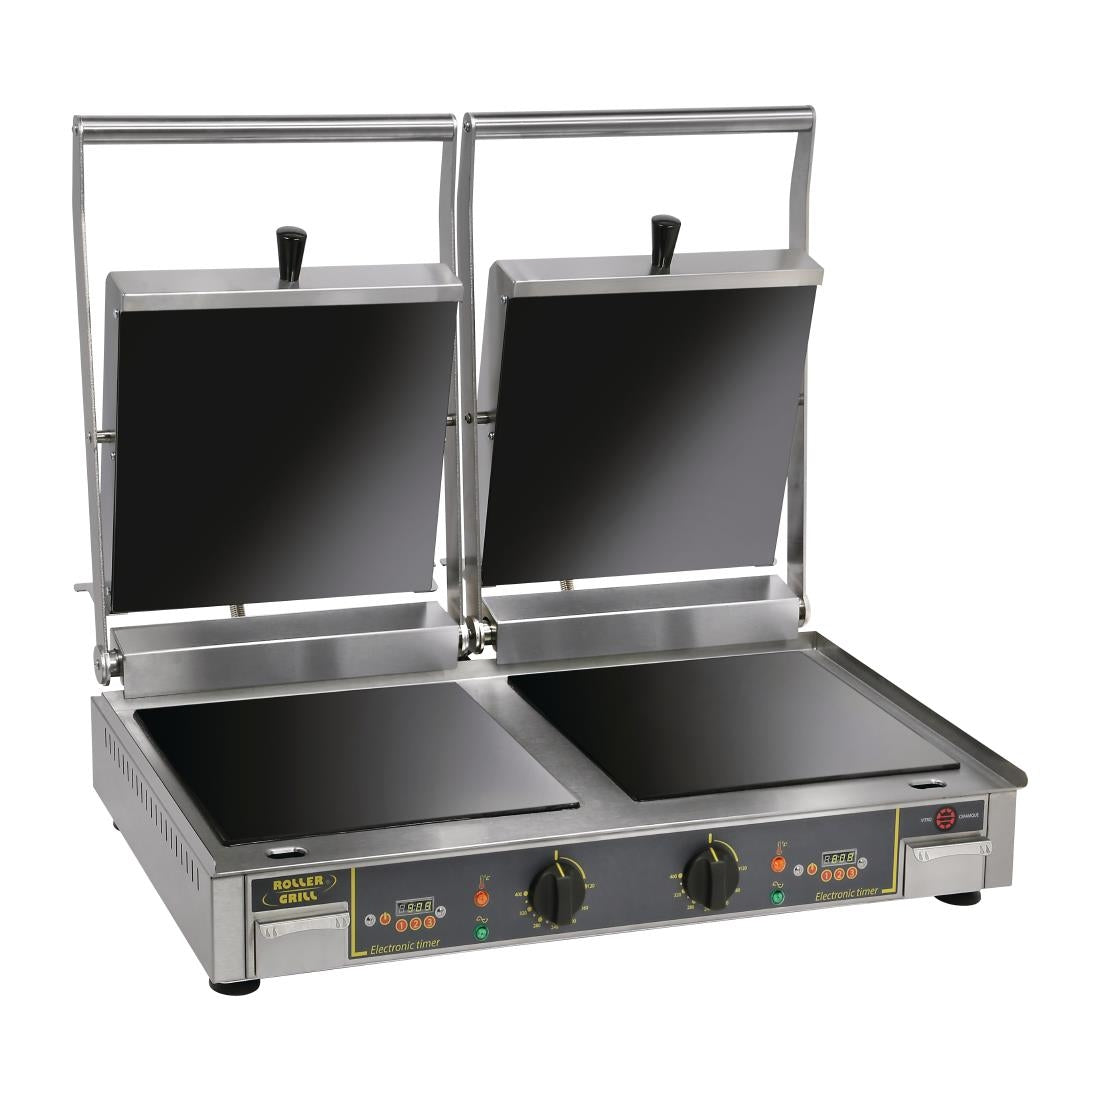 FE149 Roller Grill Premium VC DFT Double Ribbed Contact Grill JD Catering Equipment Solutions Ltd